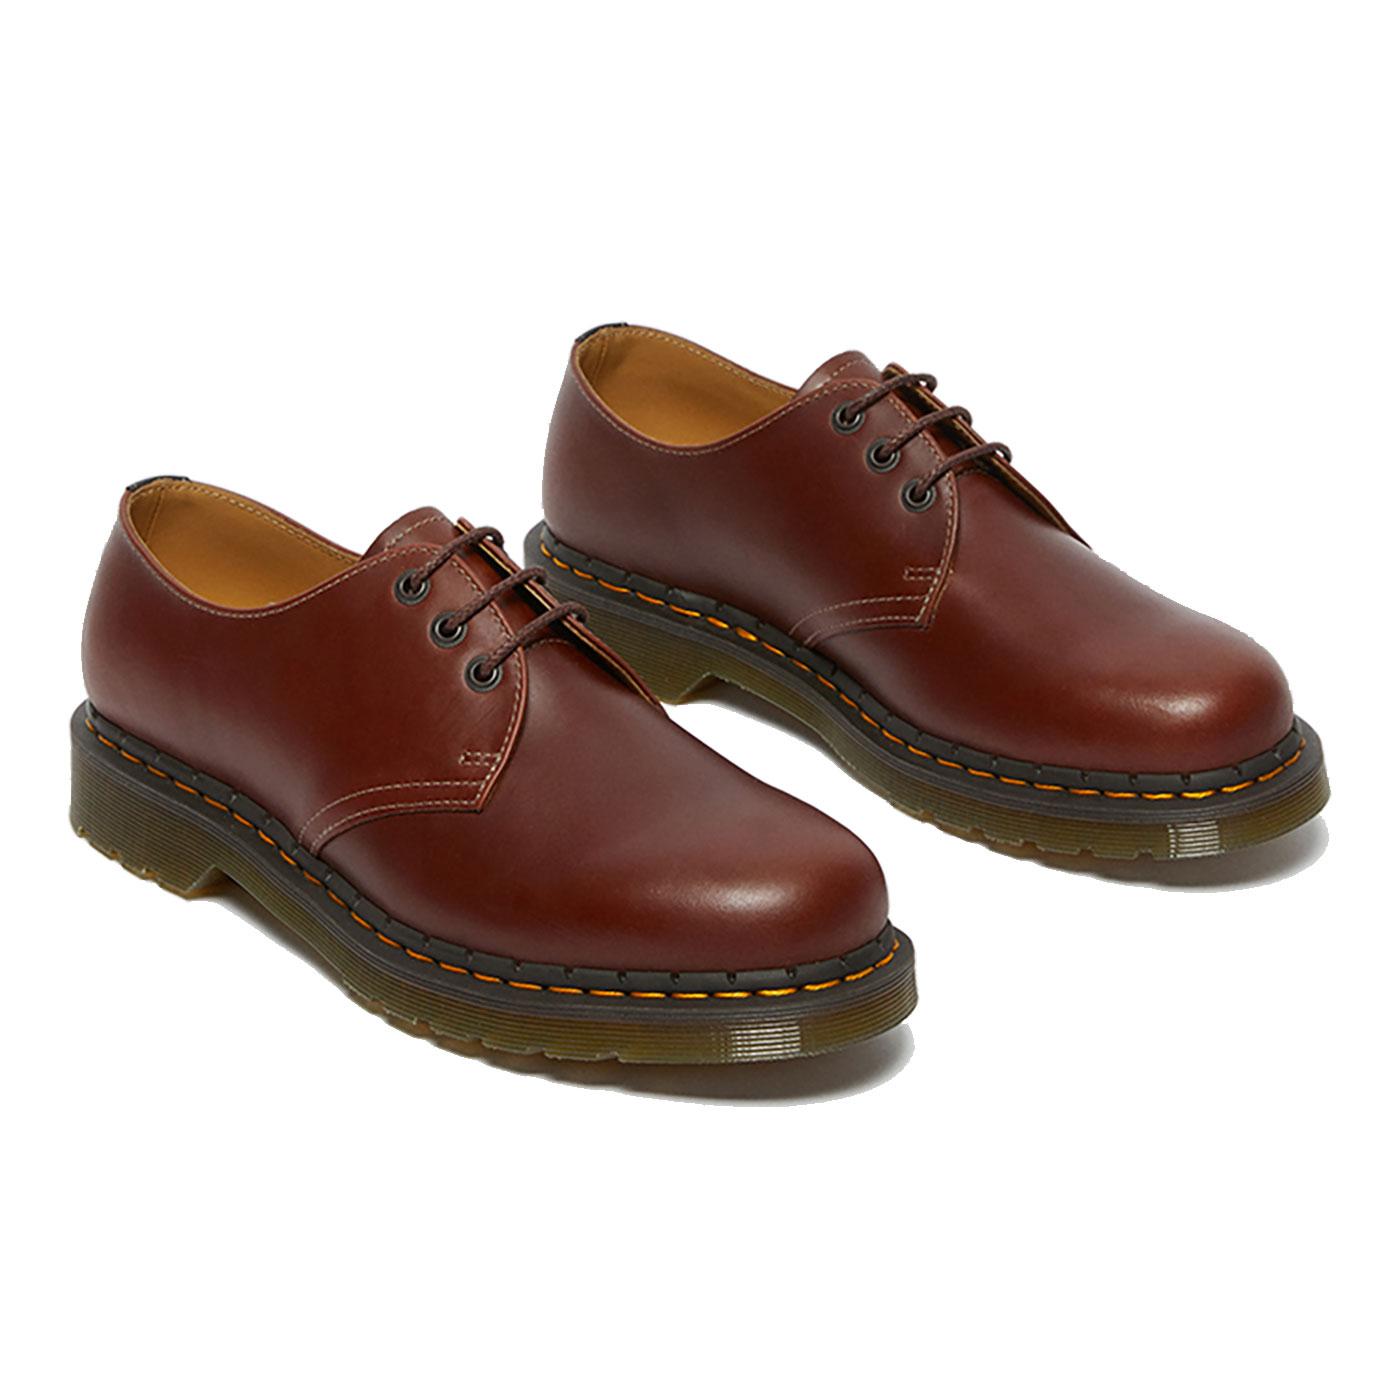 DR MARTENS 1461 Abruzzo WP Mens Shoes in Brown + Black